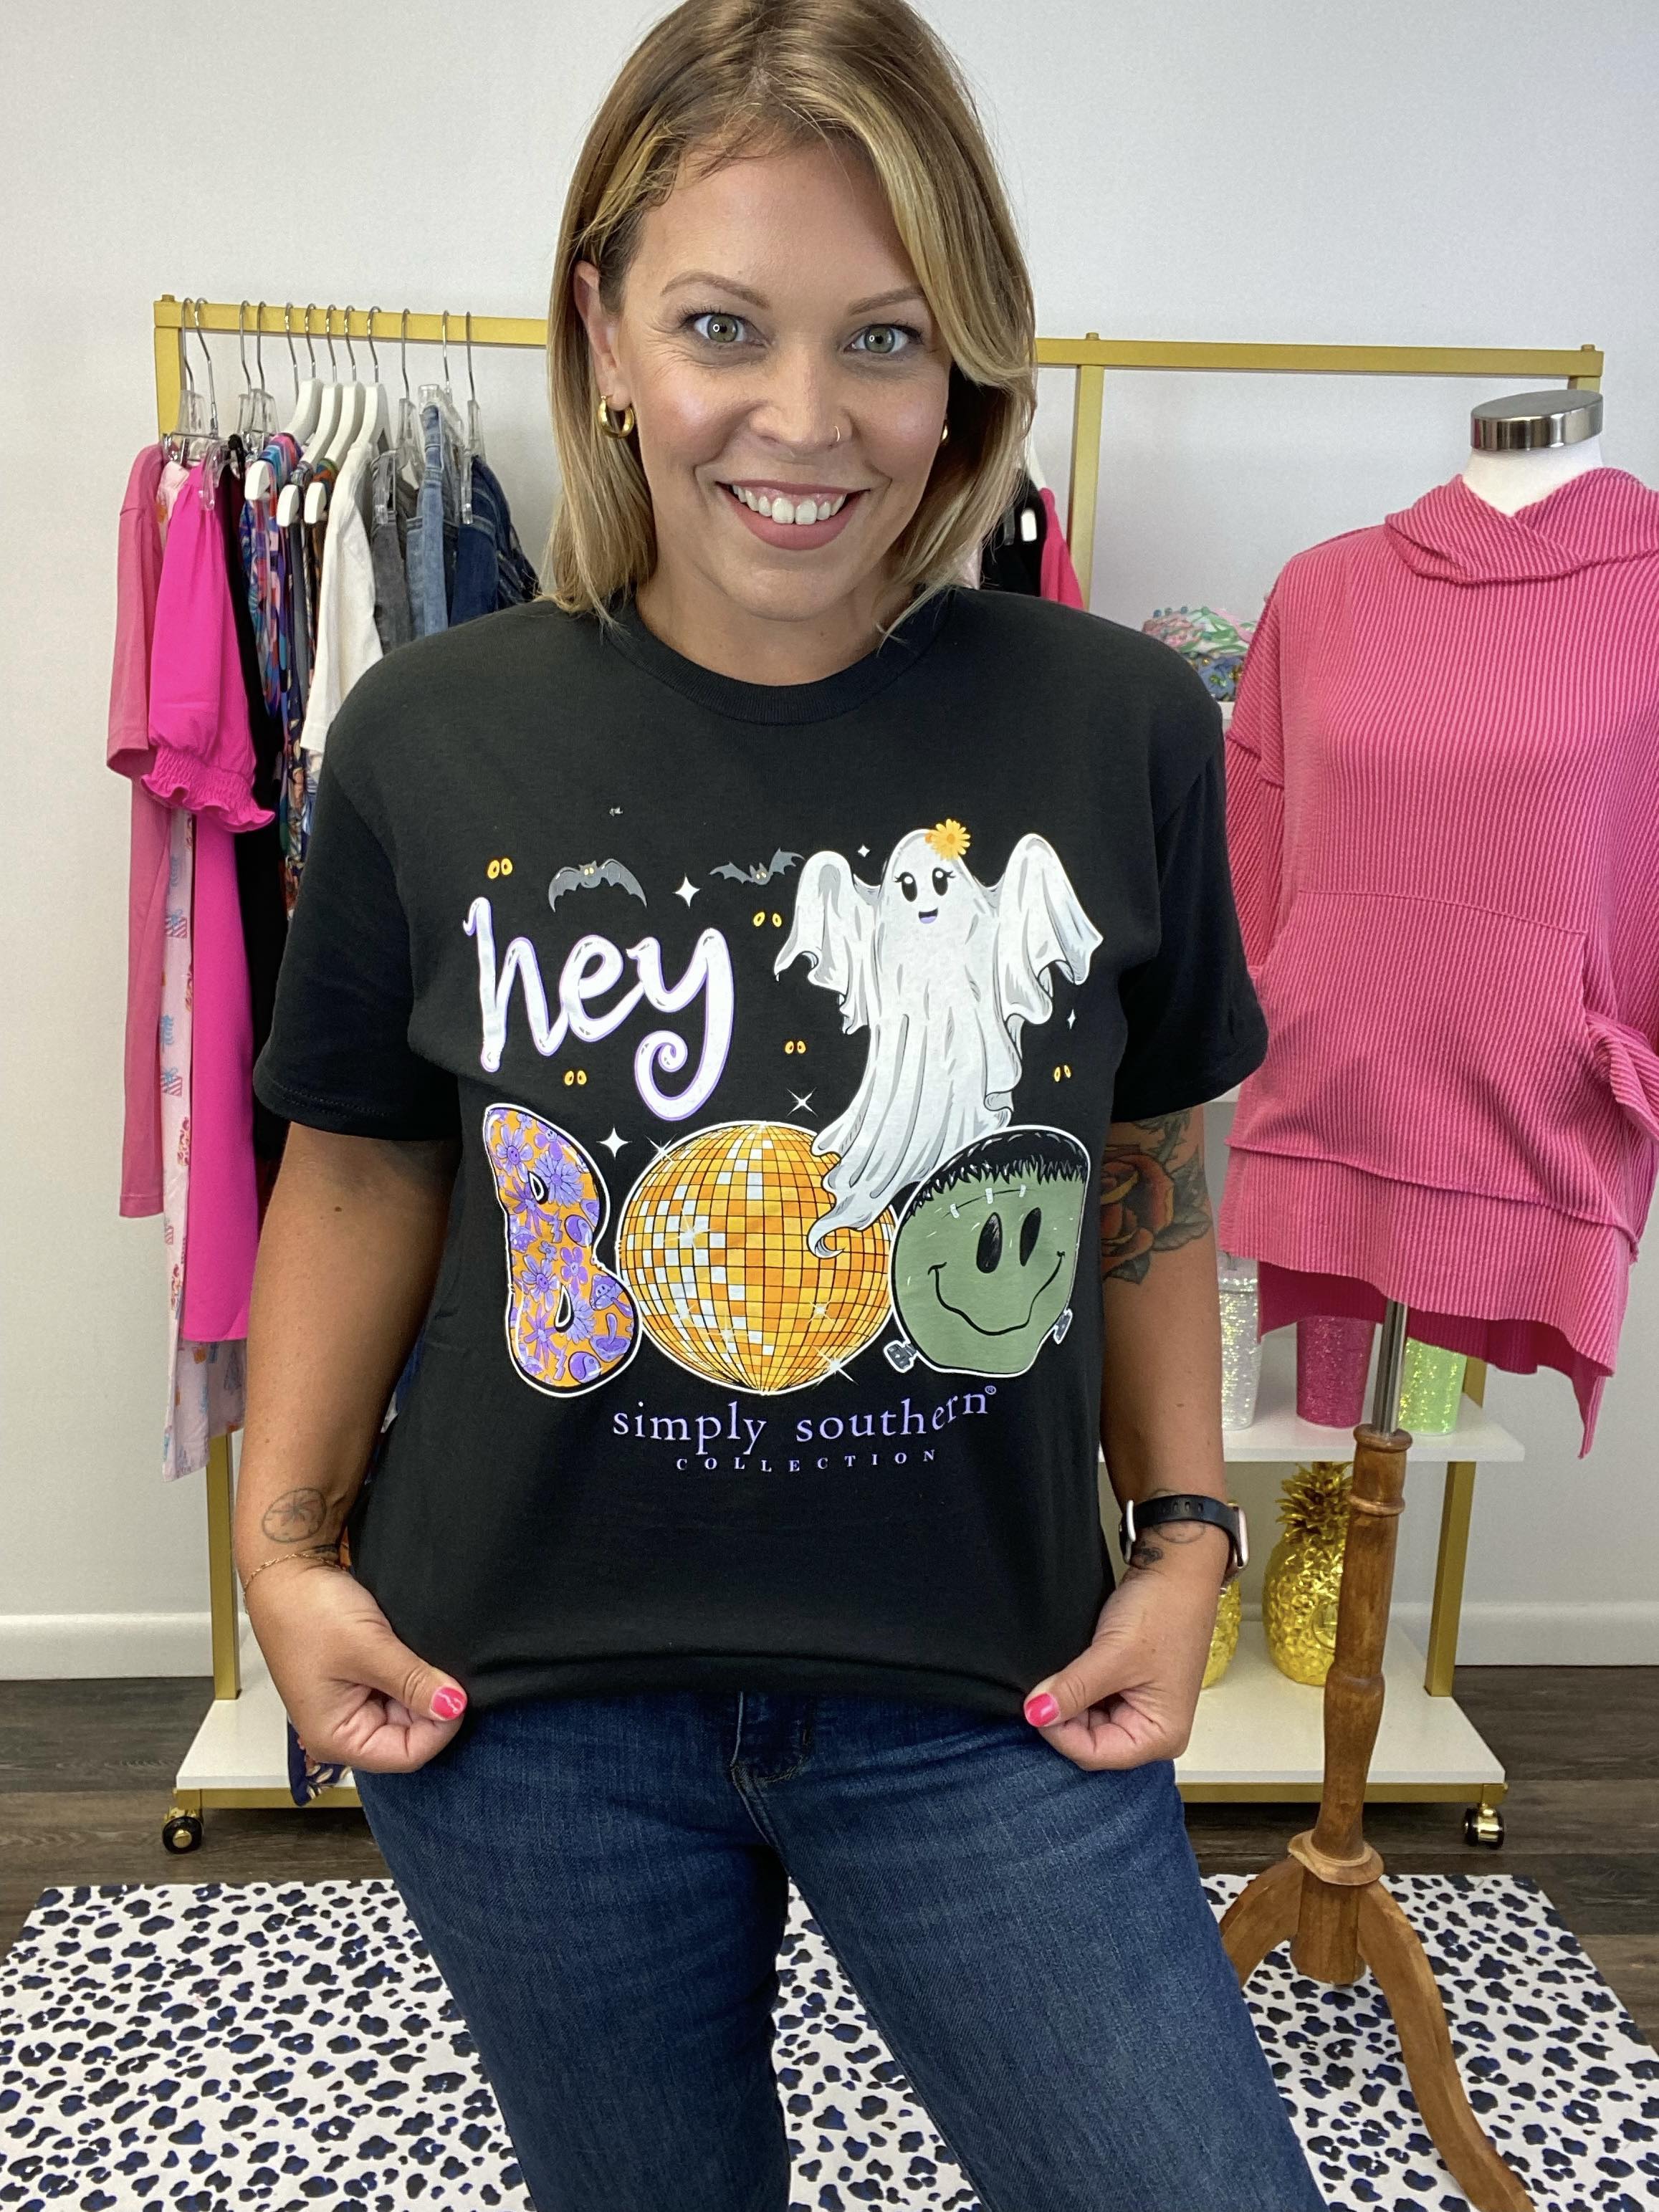 'Hey Boo' Ghost Short Sleeve Tee by Simply Southern